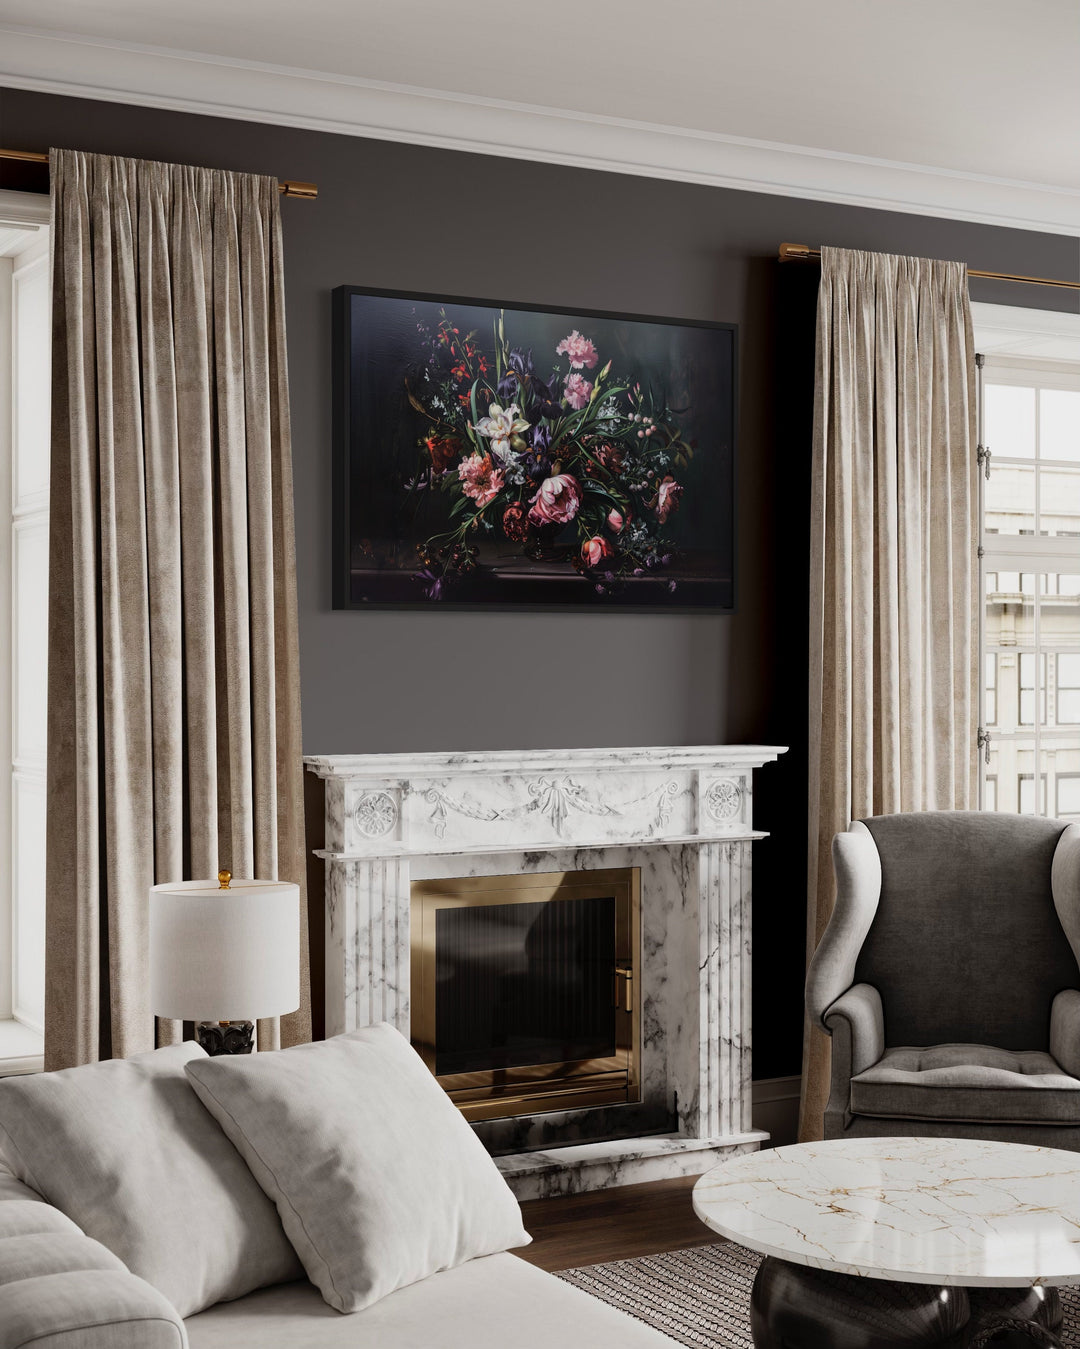 Dark Academia Moody Vintage Flowers Framed Canvas Wall Art above fireplace